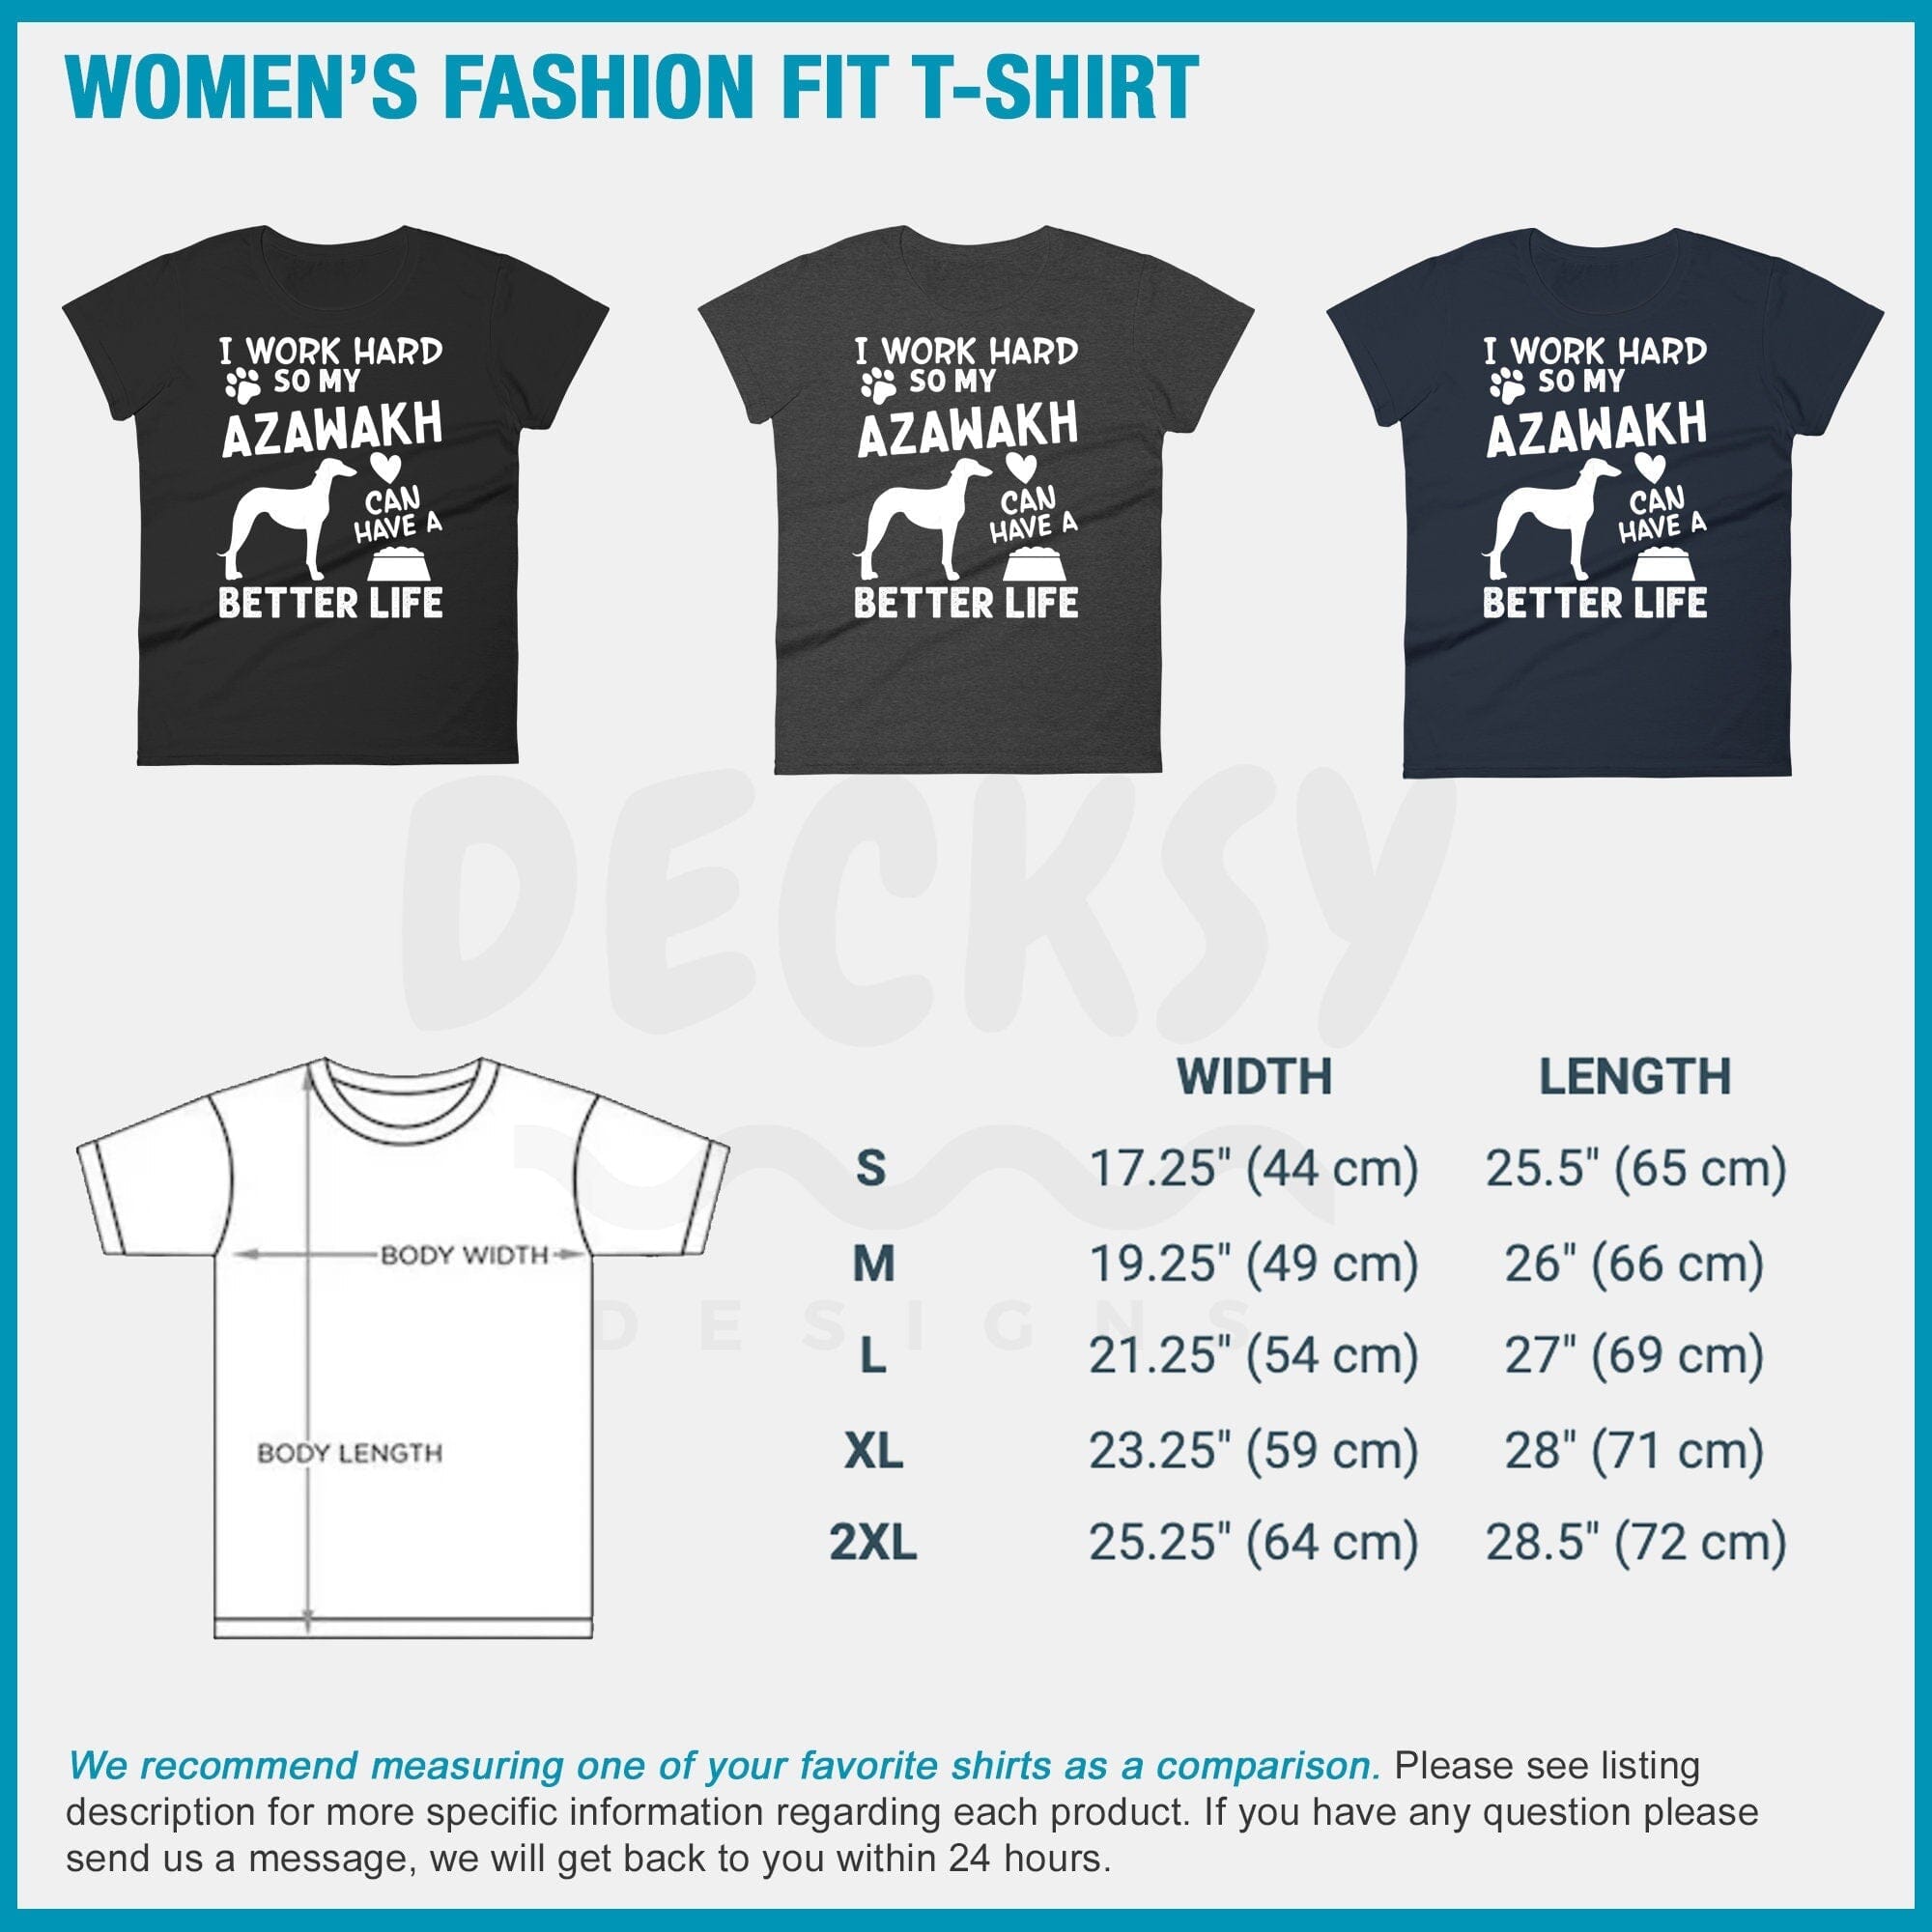 Azawakh Shirt, Dog Lover Gift-Clothing:Gender-Neutral Adult Clothing:Tops & Tees:T-shirts:Graphic Tees-DecksyDesigns